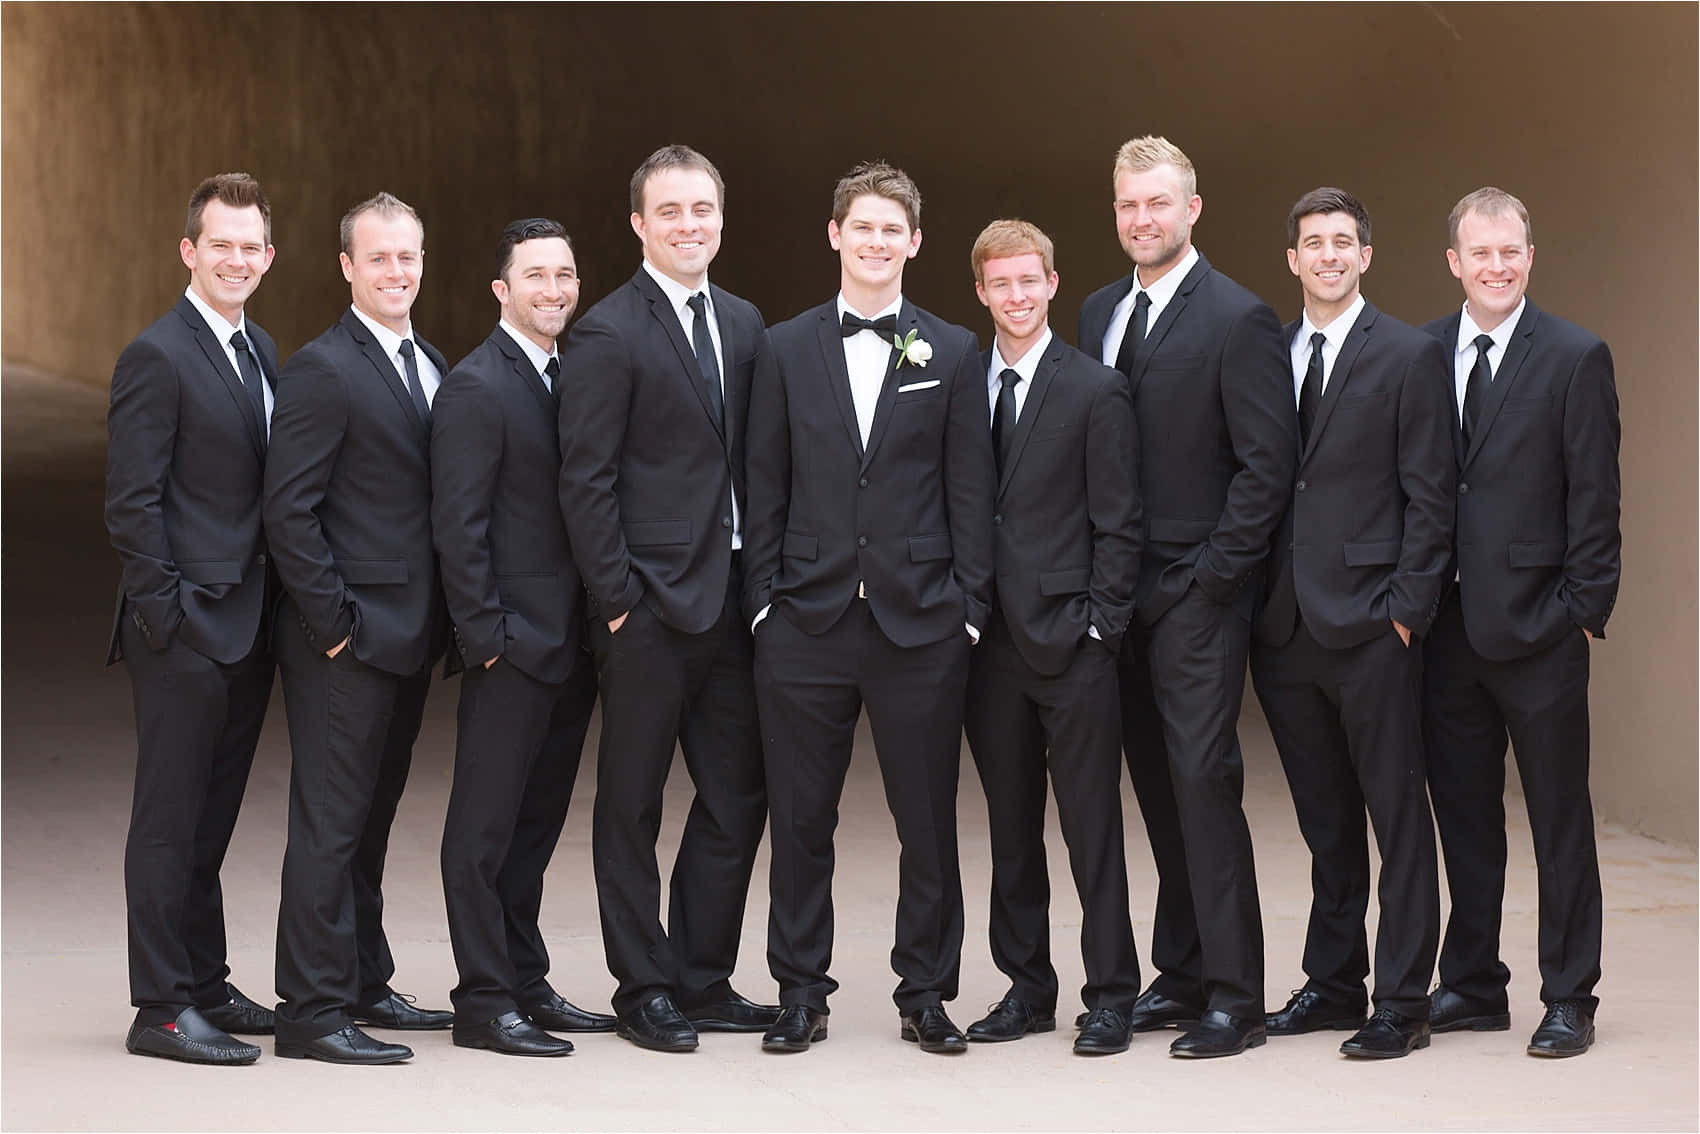 A Group Of Groomsmen In Black Suits Posing For A Photo